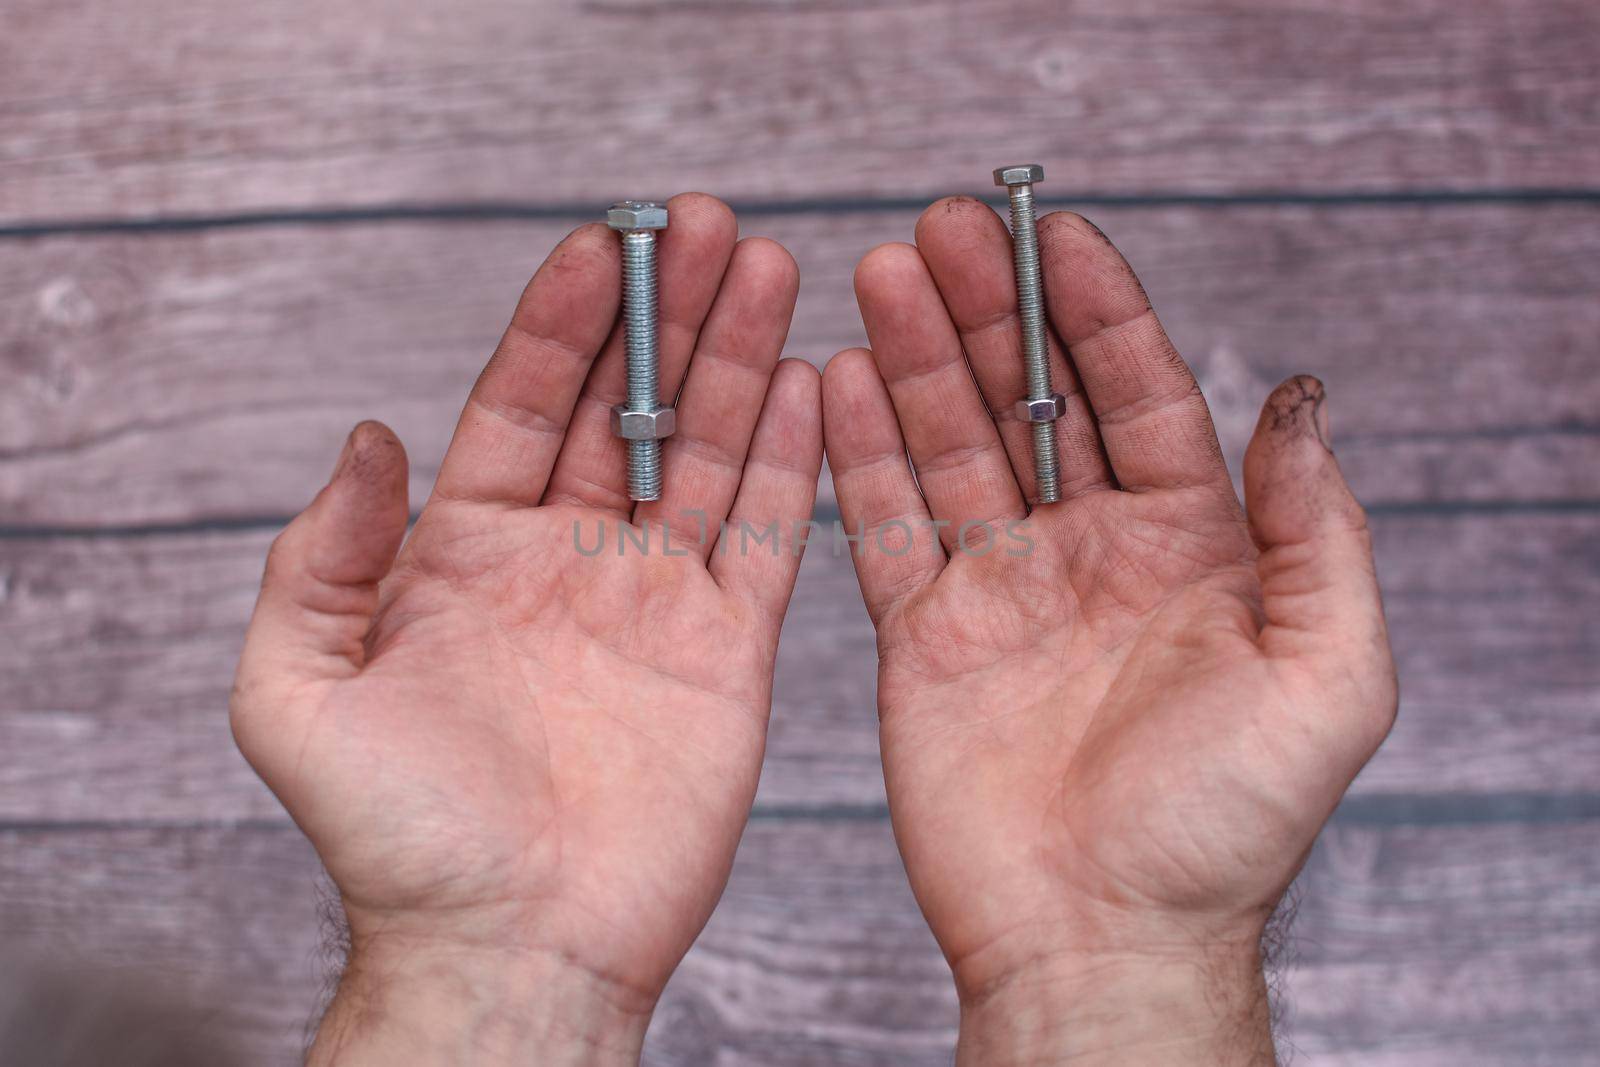 two bolts and nuts in working men's hands. On a wooden background.